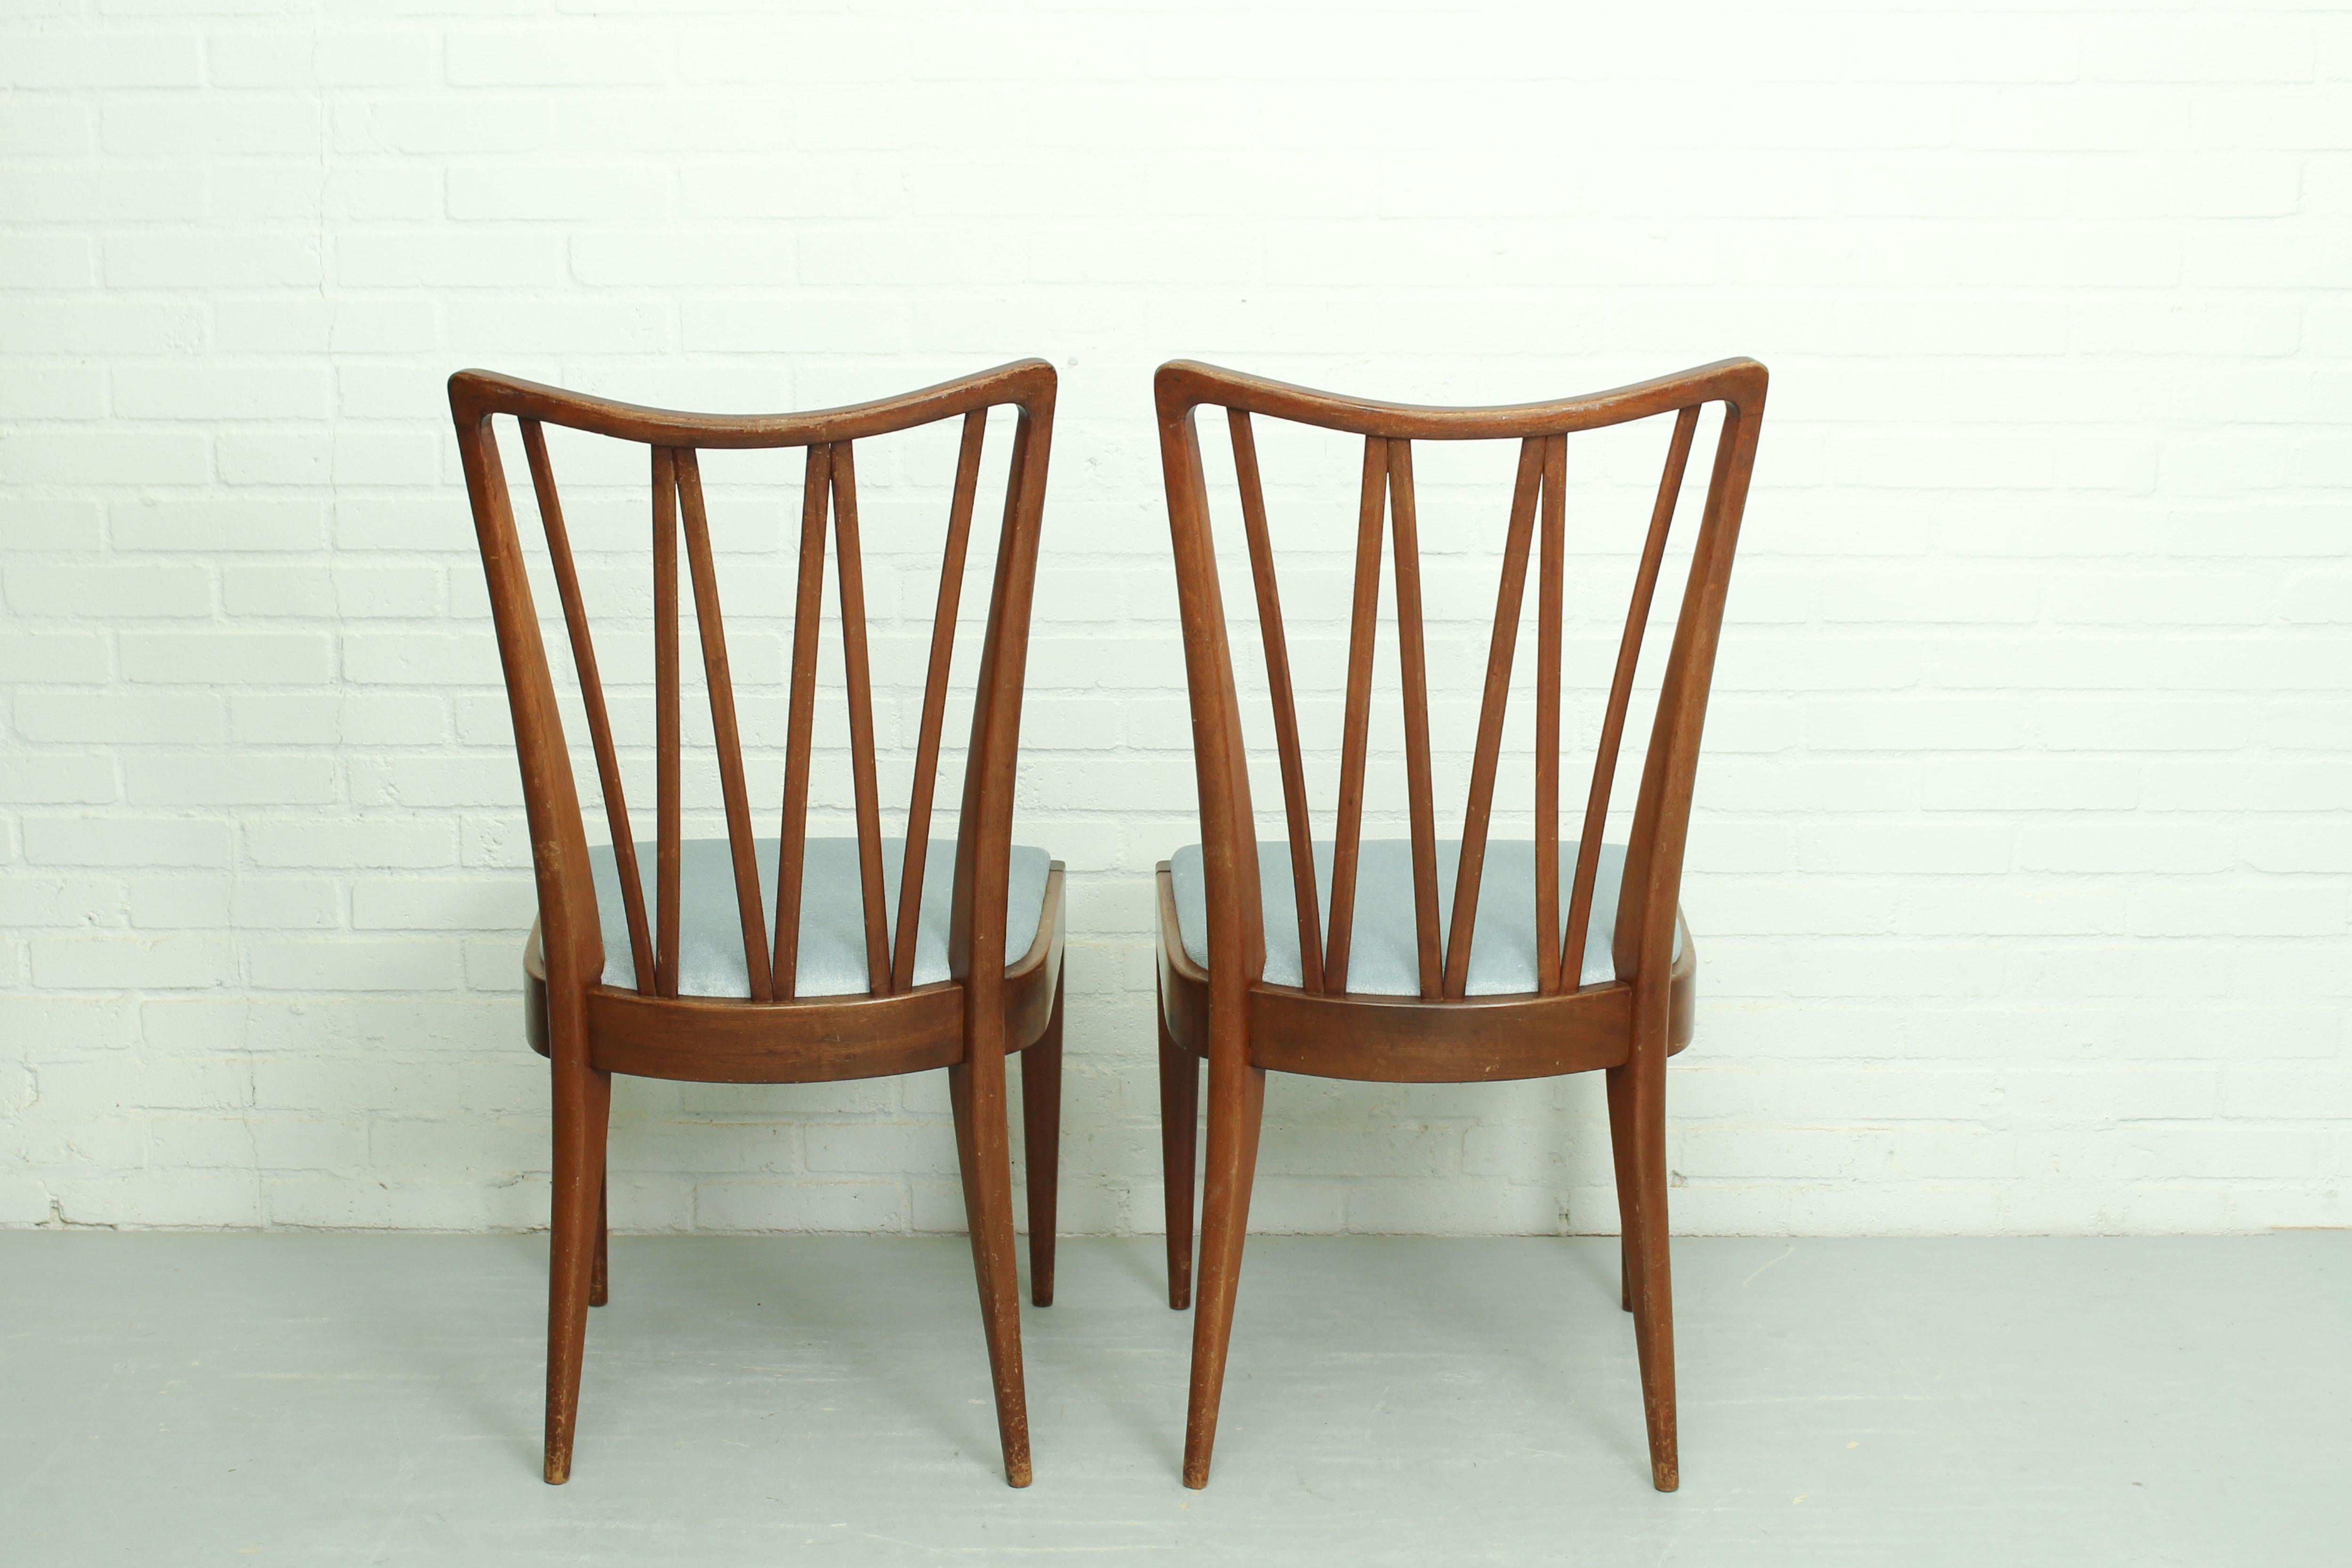 2 Dining Chairs designed by A. A. Patijn for Zijlstra Furniture, The Netherlands In Good Condition For Sale In Appeltern, Gelderland